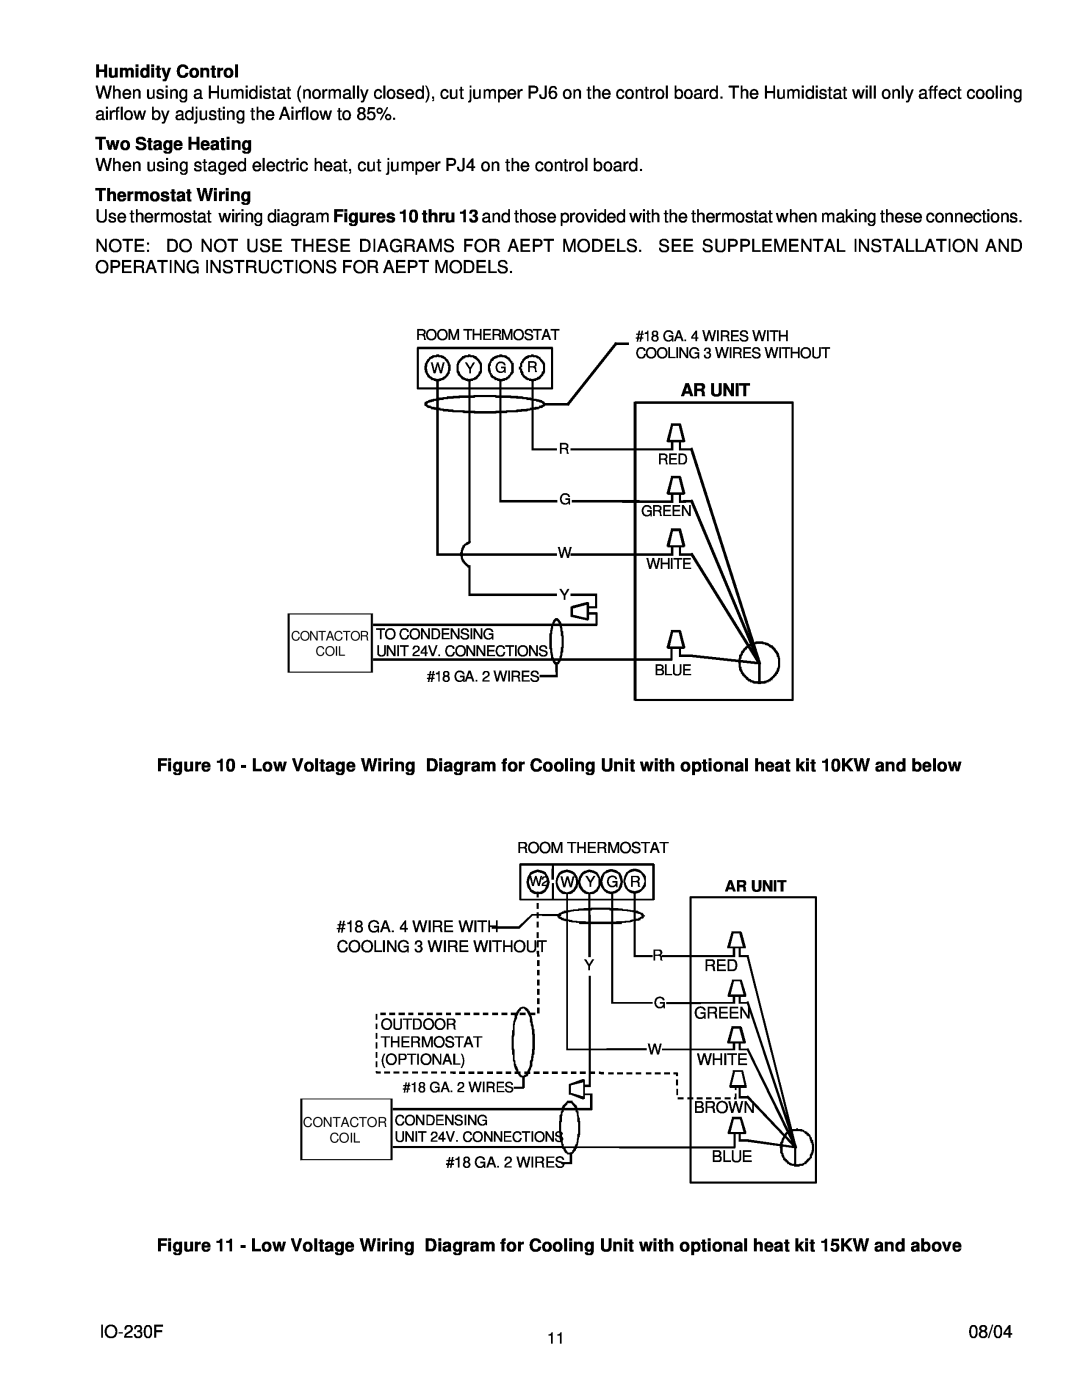 Goodman Mfg AEPT, ARPT, ARPF operating instructions Ar Unit, Humidity Control, Two Stage Heating, Thermostat Wiring 